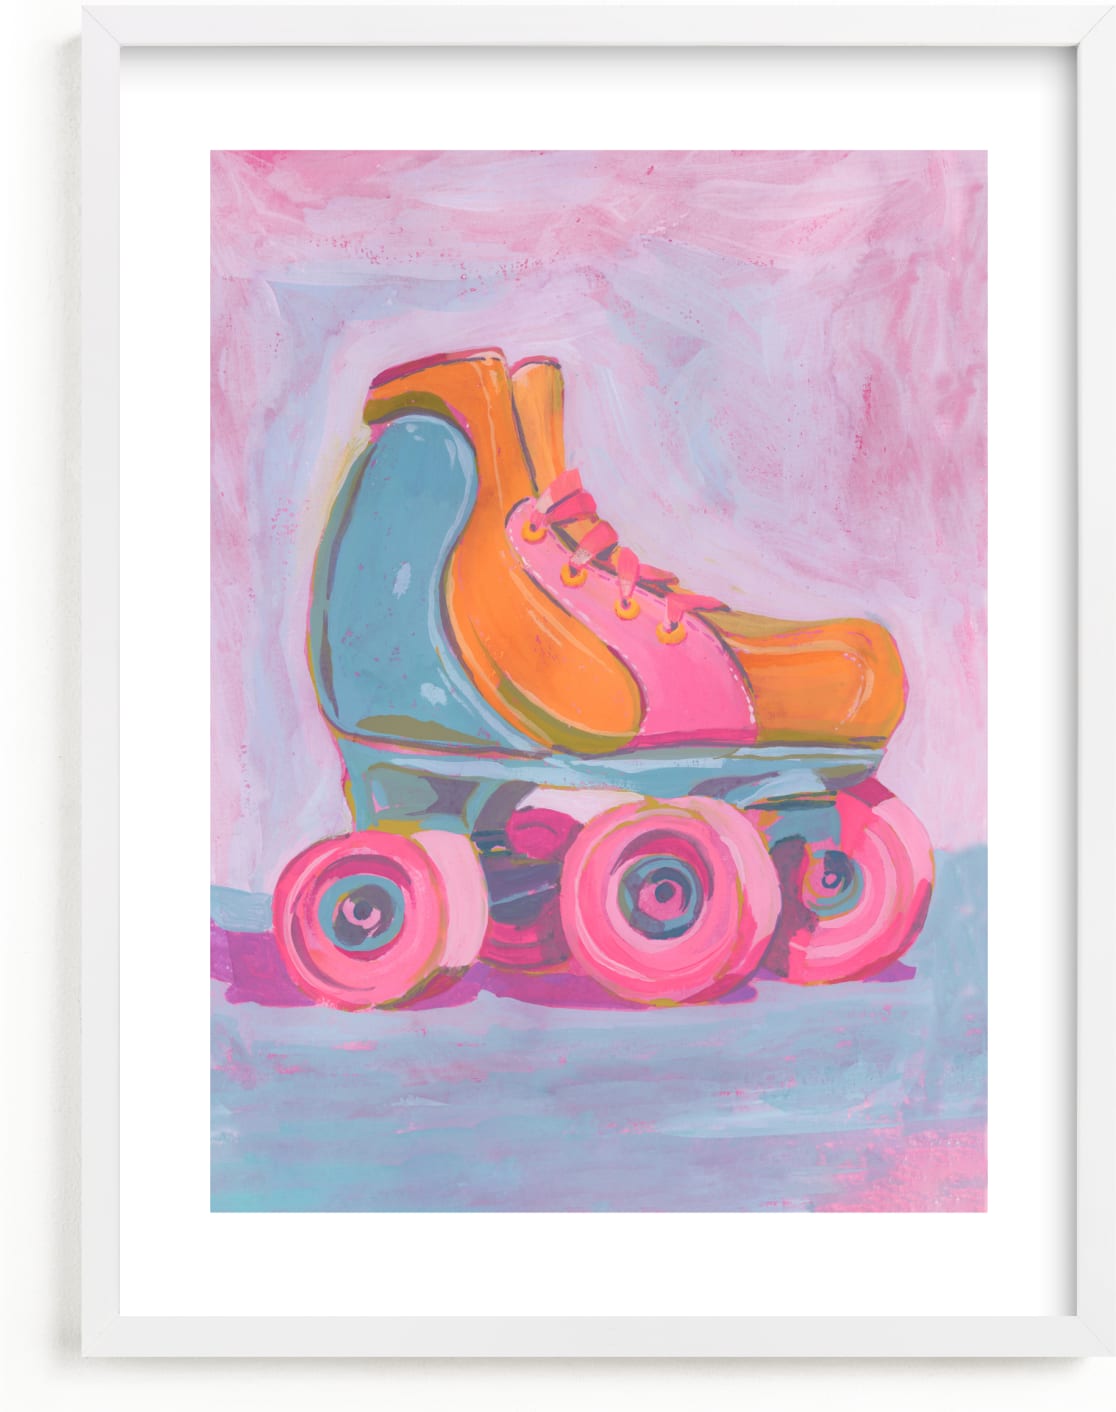 This is a blue kids wall art by Lucrecia Caporale called Roller Skater Joy.